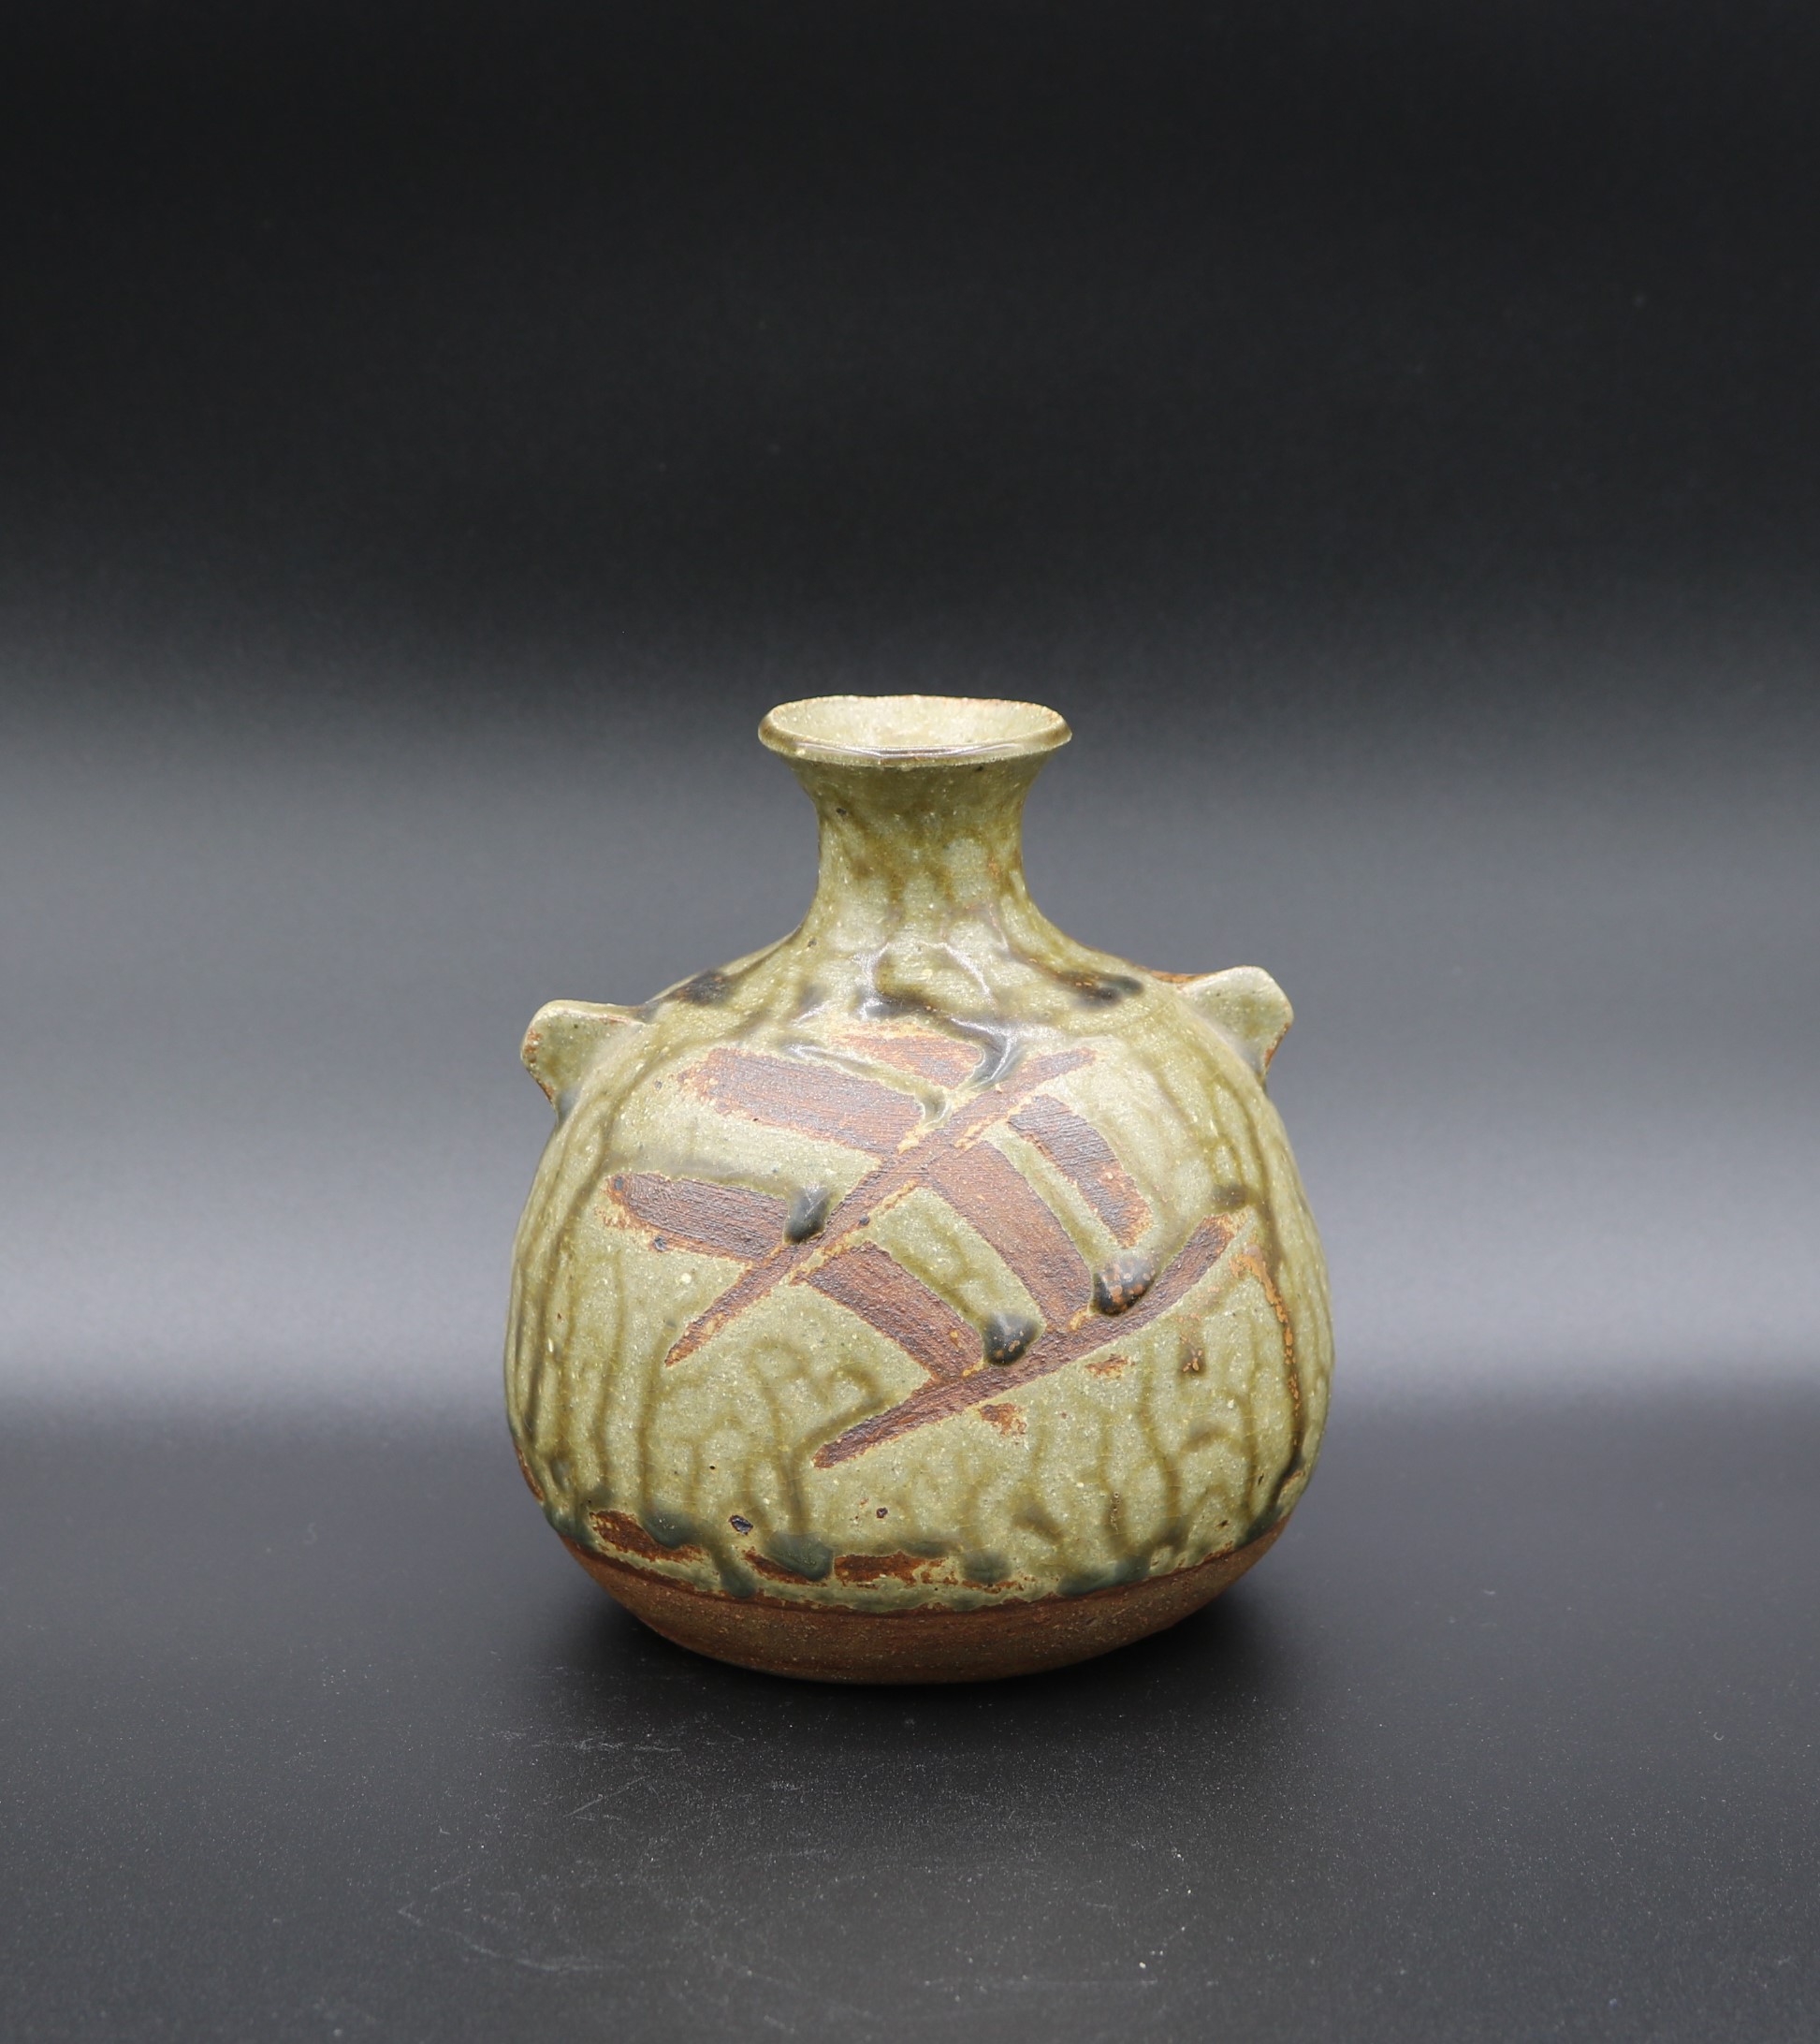 Janet Leach  51. a small bottle vase with lugs